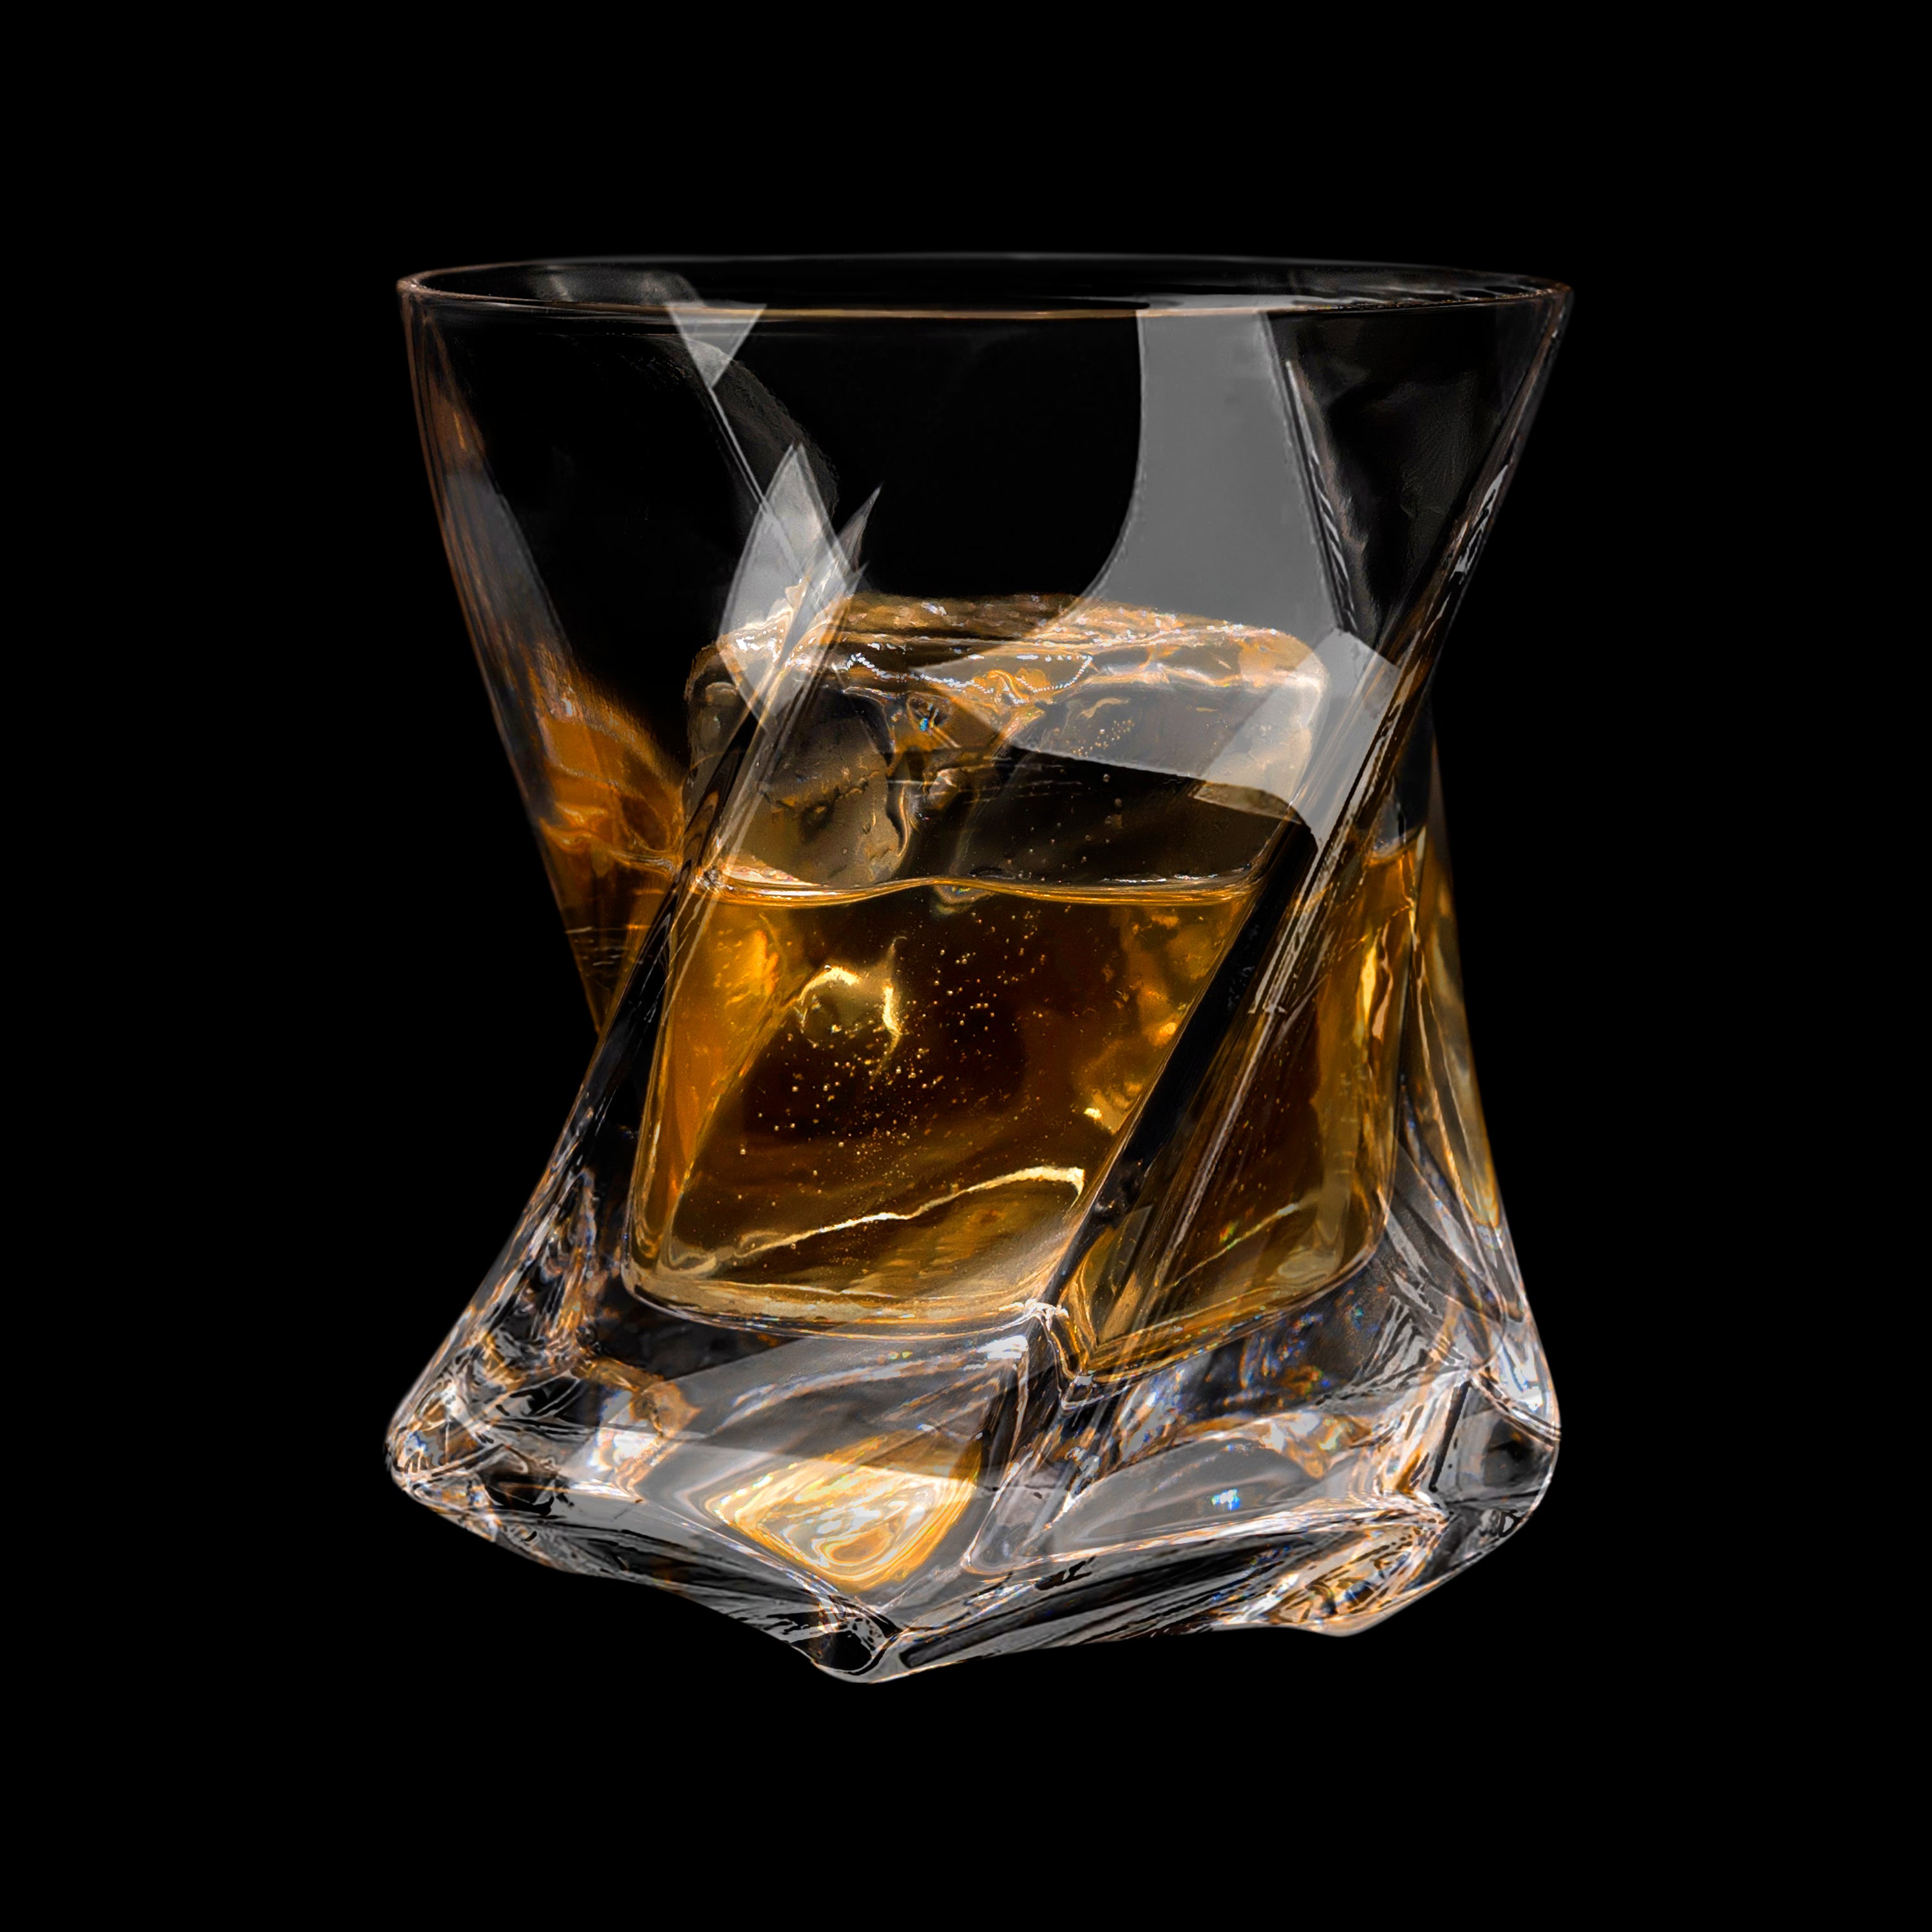 Star Heavy Tumbler | Set of 2 Hand-Blown Crystal Whiskey Glasses with Complementary Matching Ice Mold Tray.